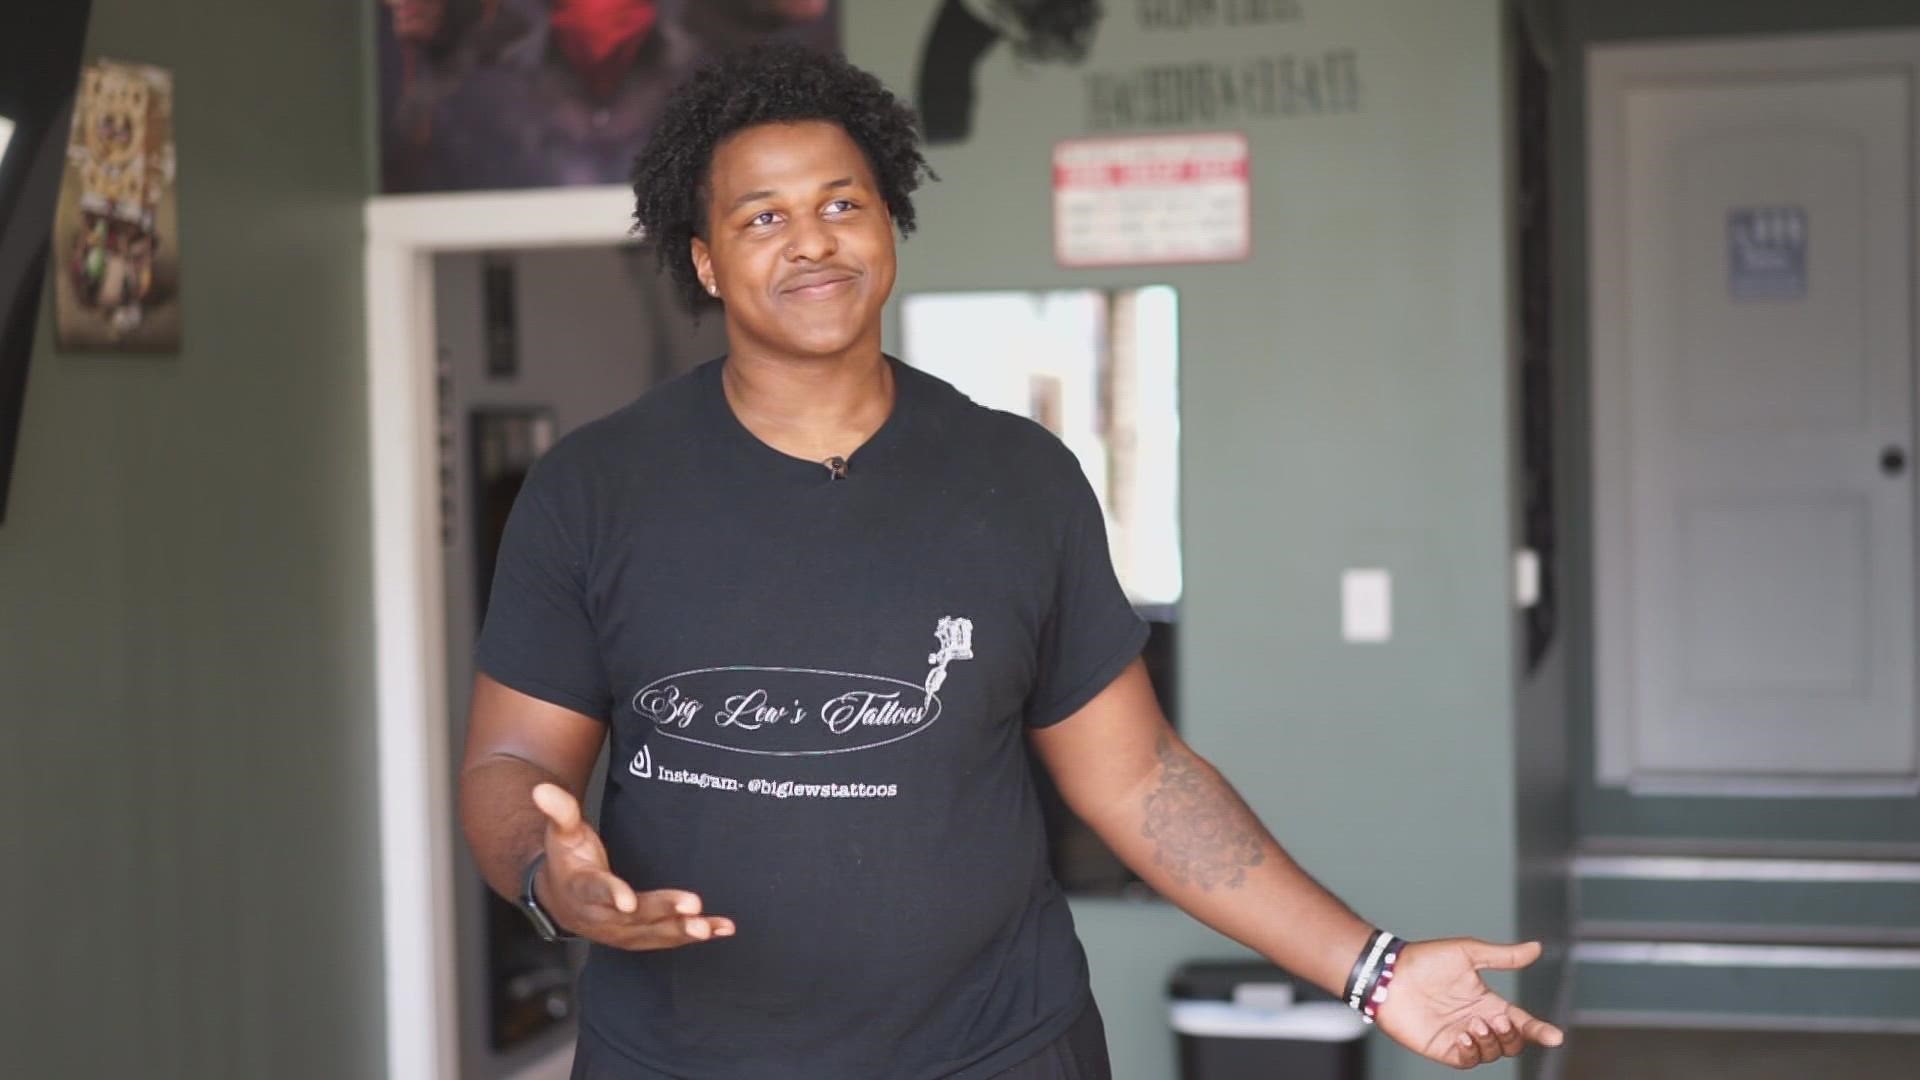 Samuel Lewis is taking his passion for tattooing and giving back to the community with a new shop.